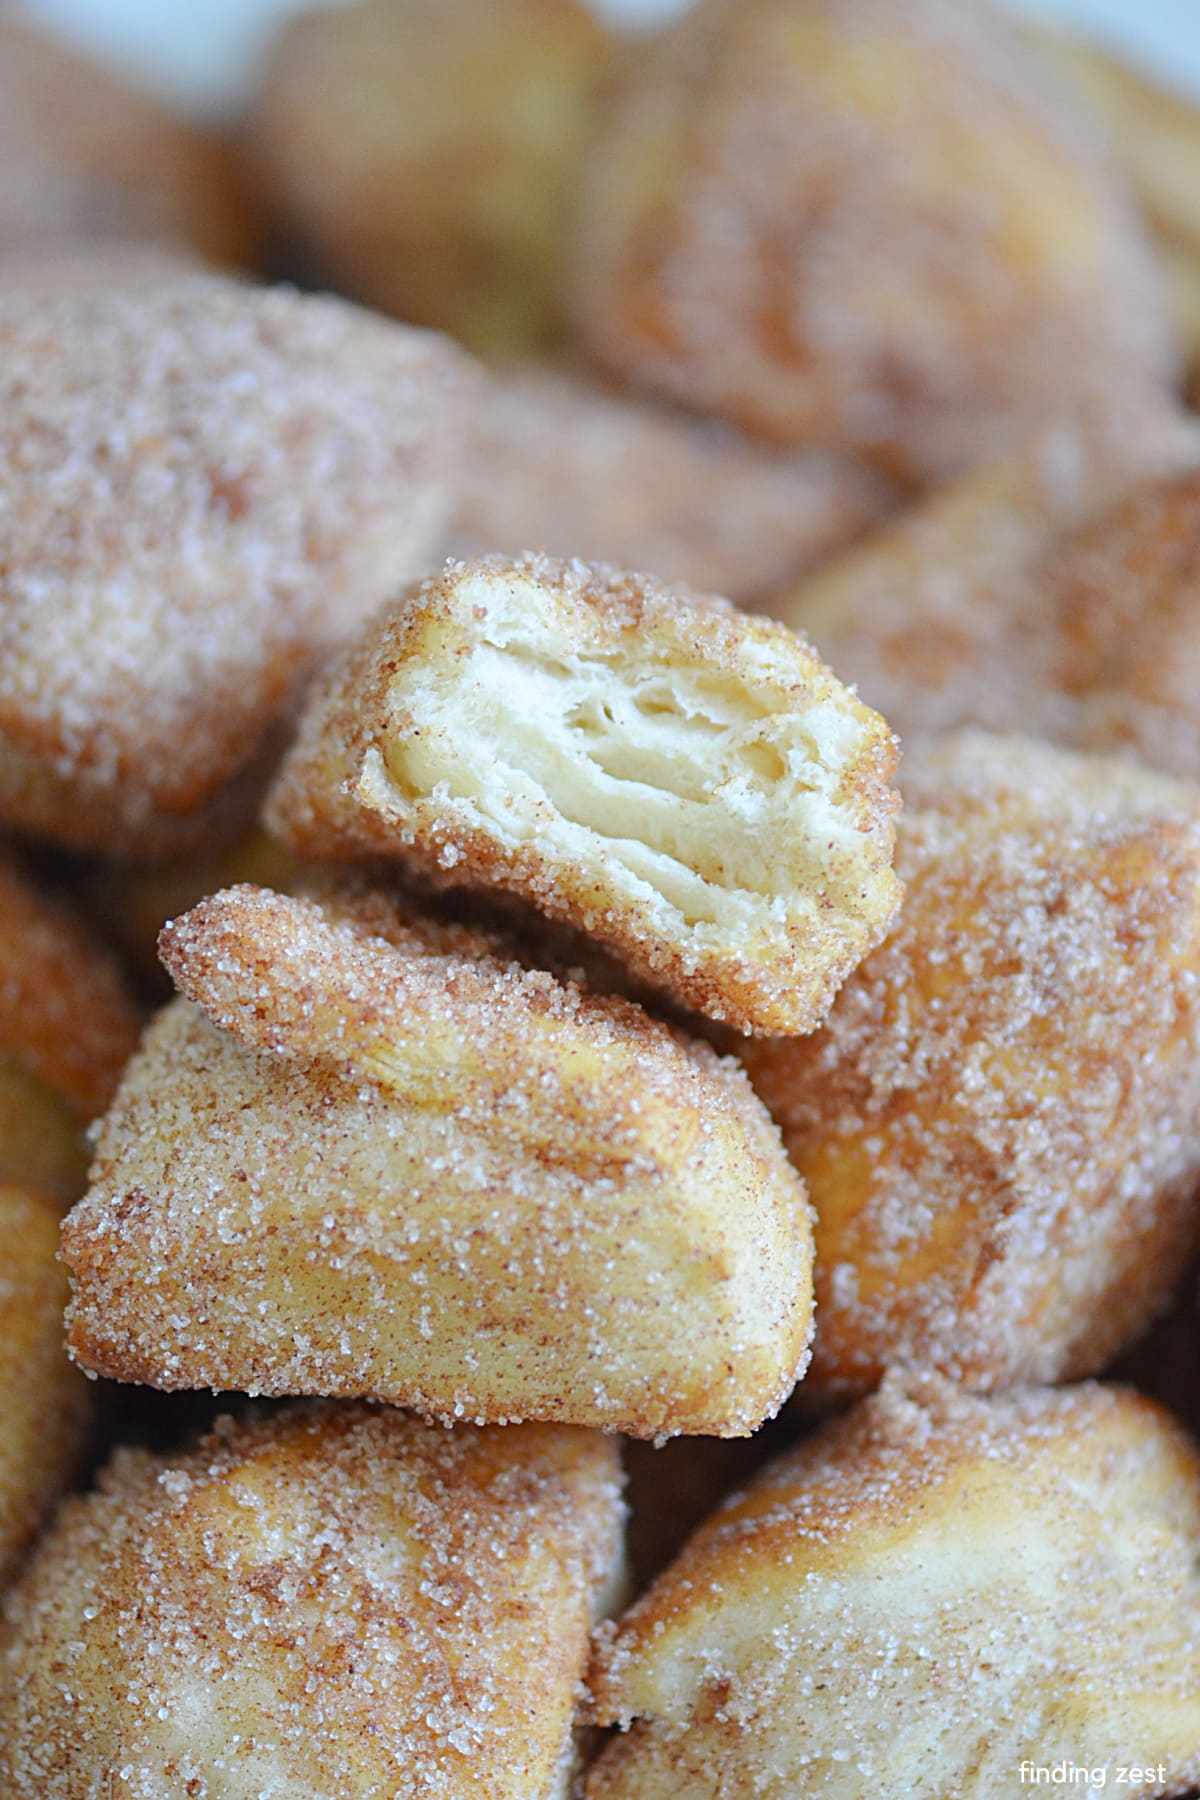 These donut holes are a breeze to make. All you need is some canned biscuits, cinnamon and sugar, and your air fryer. These delicious little bites will be the perfect way to start your day.